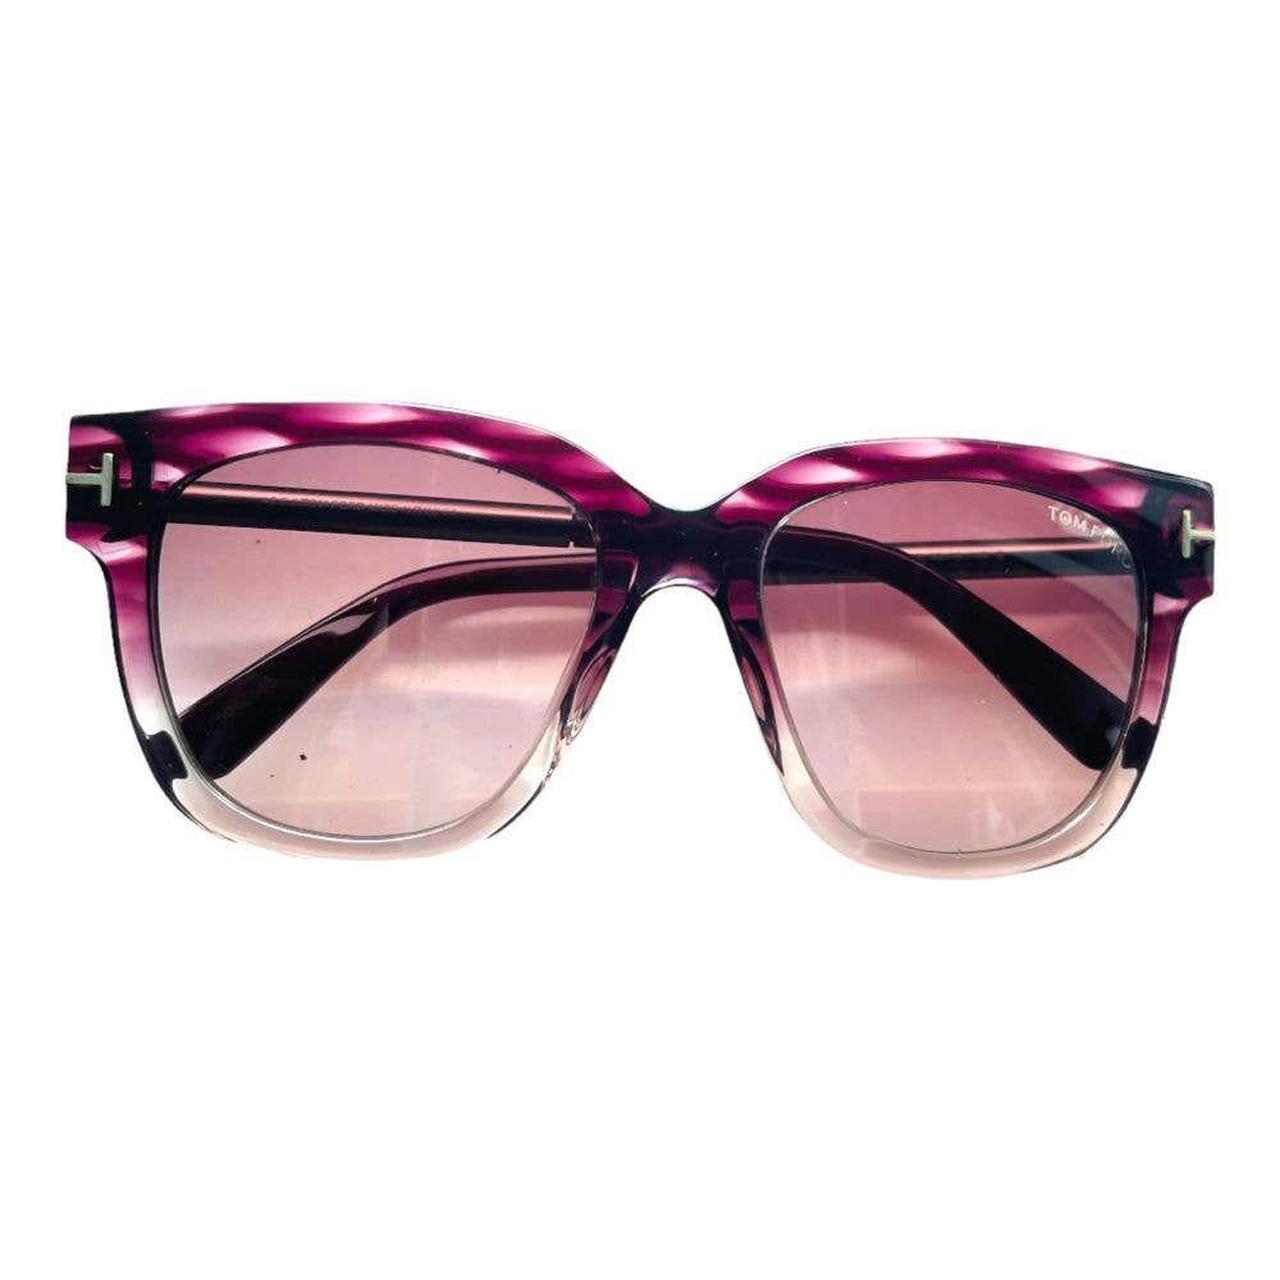 TOM FORD Women's Purple and Silver Sunglasses (4)